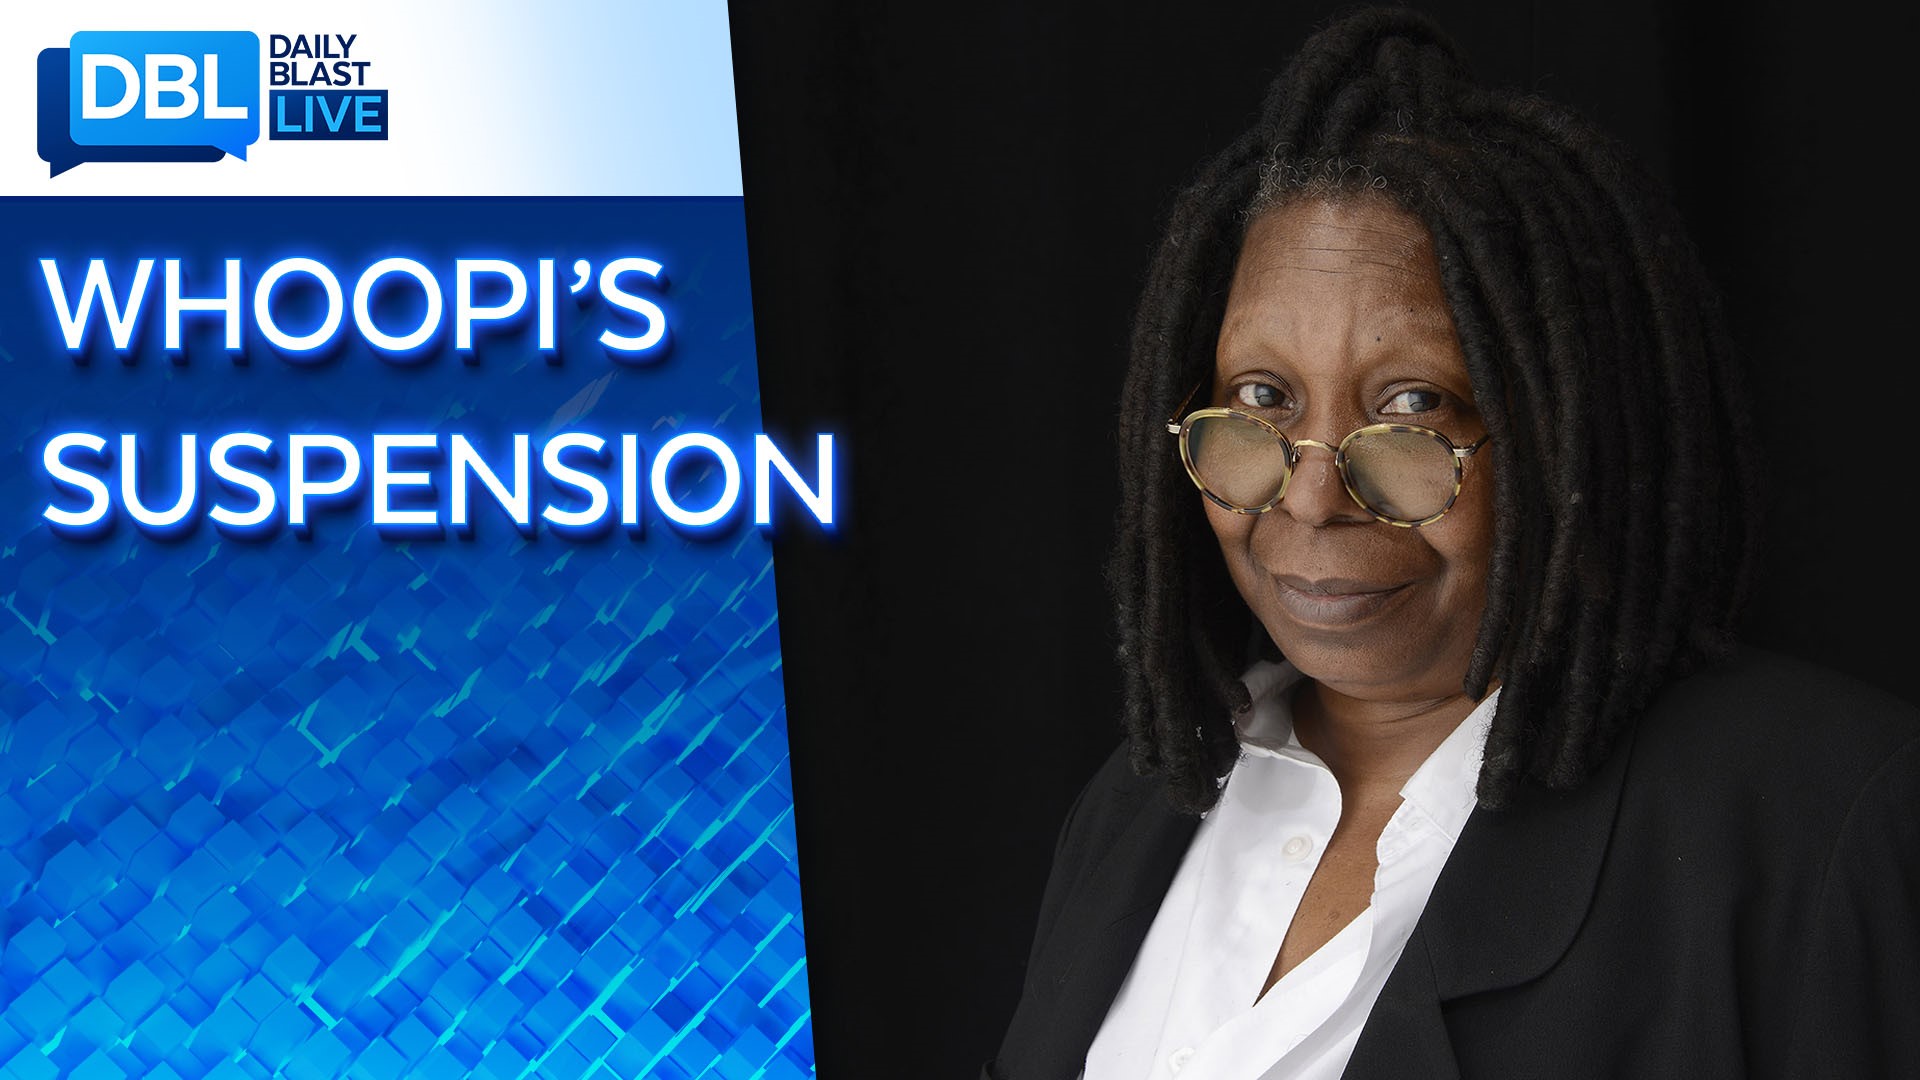 The DBL panel discusses whether Whoopi Goldberg's suspension from 'The View,' after saying race was not a factor in the Holocaust, was warranted.